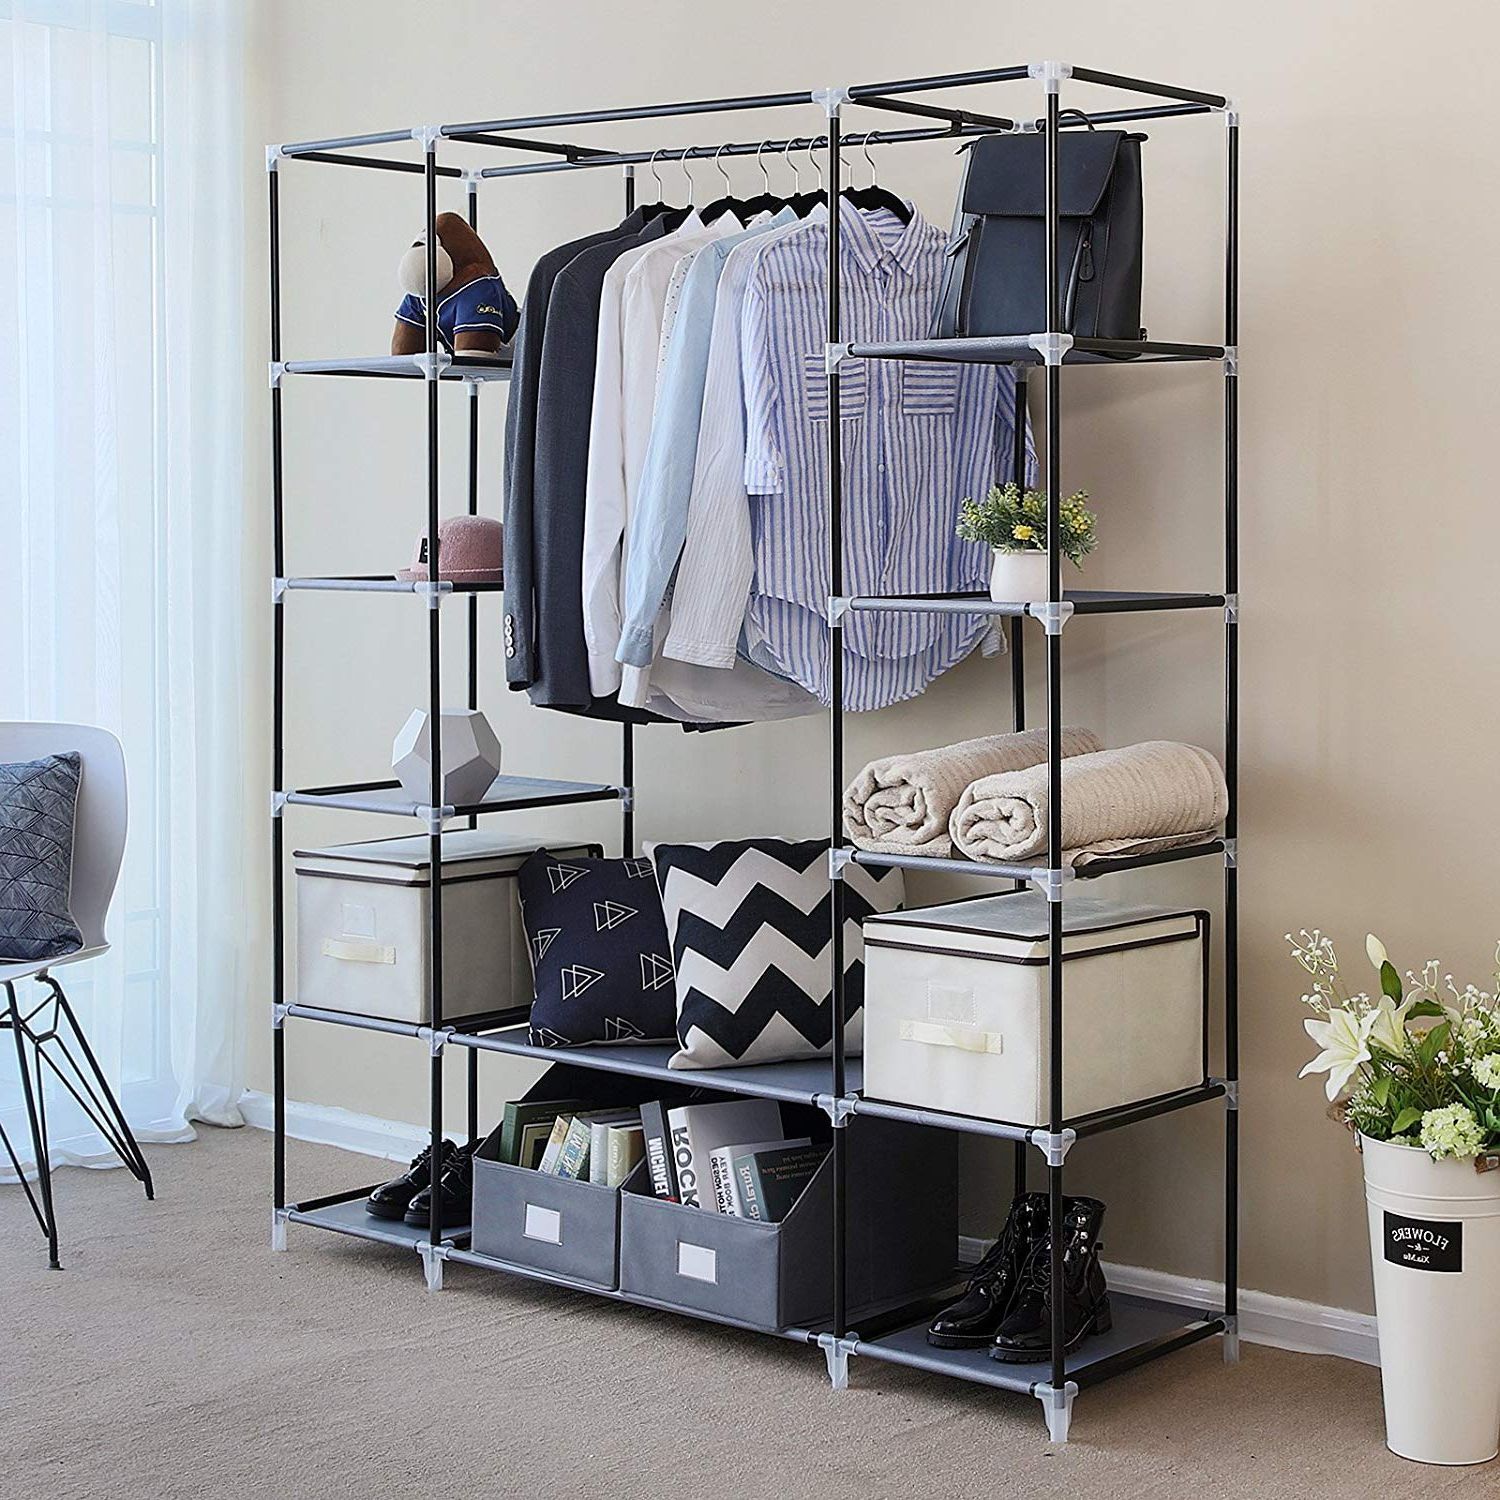 20 Portable Closet Choices For Easy Set Up And Cleaning | Storables Inside Extra Wide Portable Wardrobes (View 16 of 20)